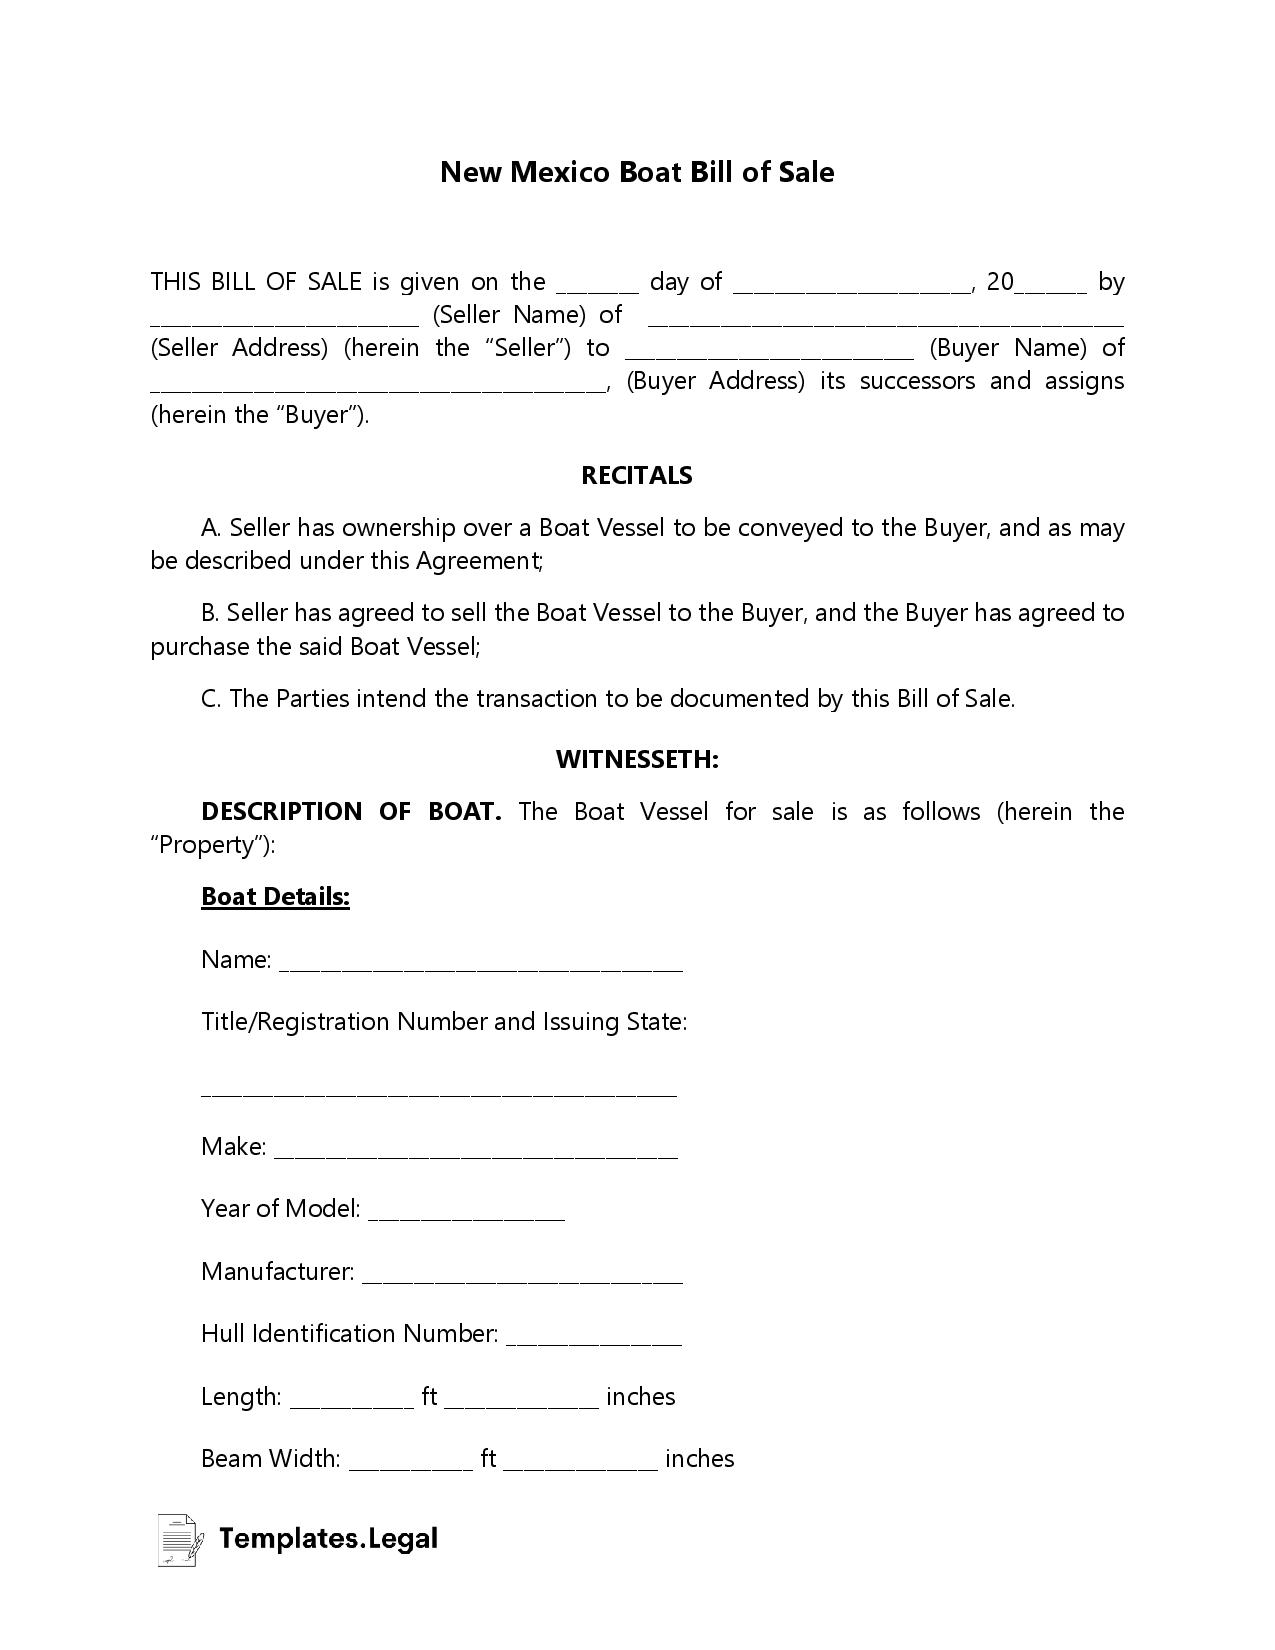 New Mexico Boat Bill of Sale - Templates.Legal